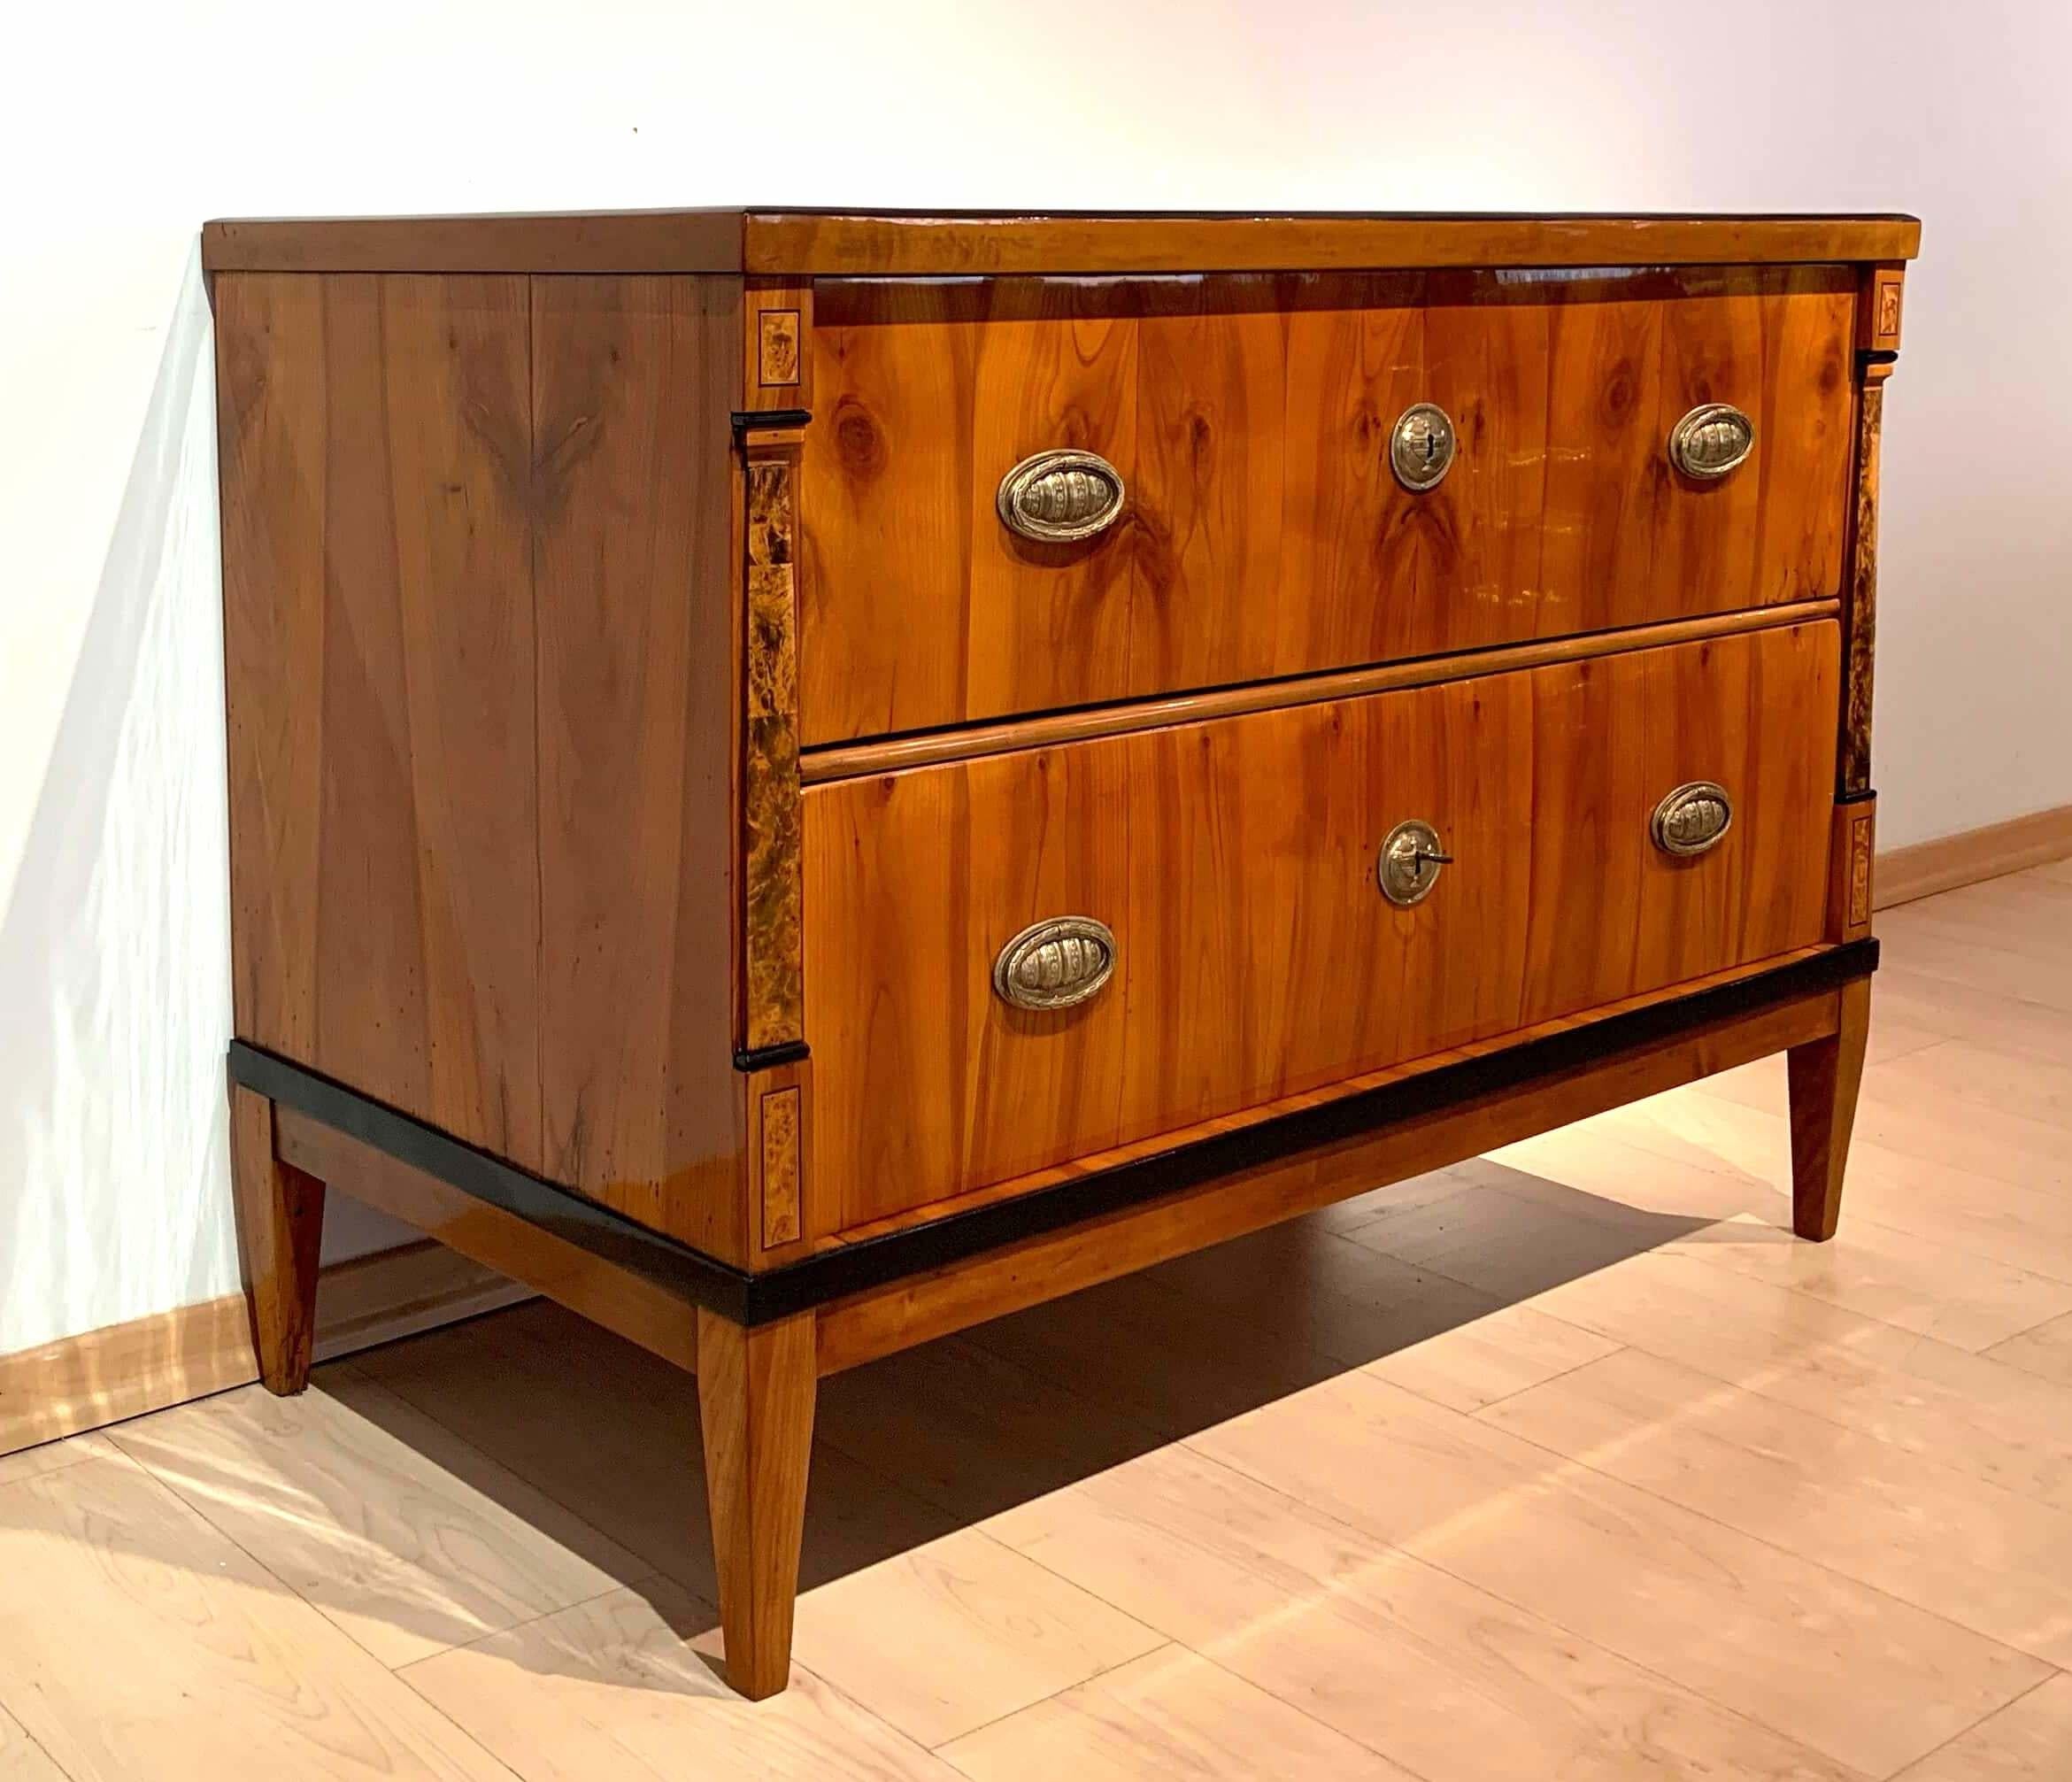 Early 19th Century Biedermeier Saloon Commode, Cherry with Inlays, South Germany circa 1820